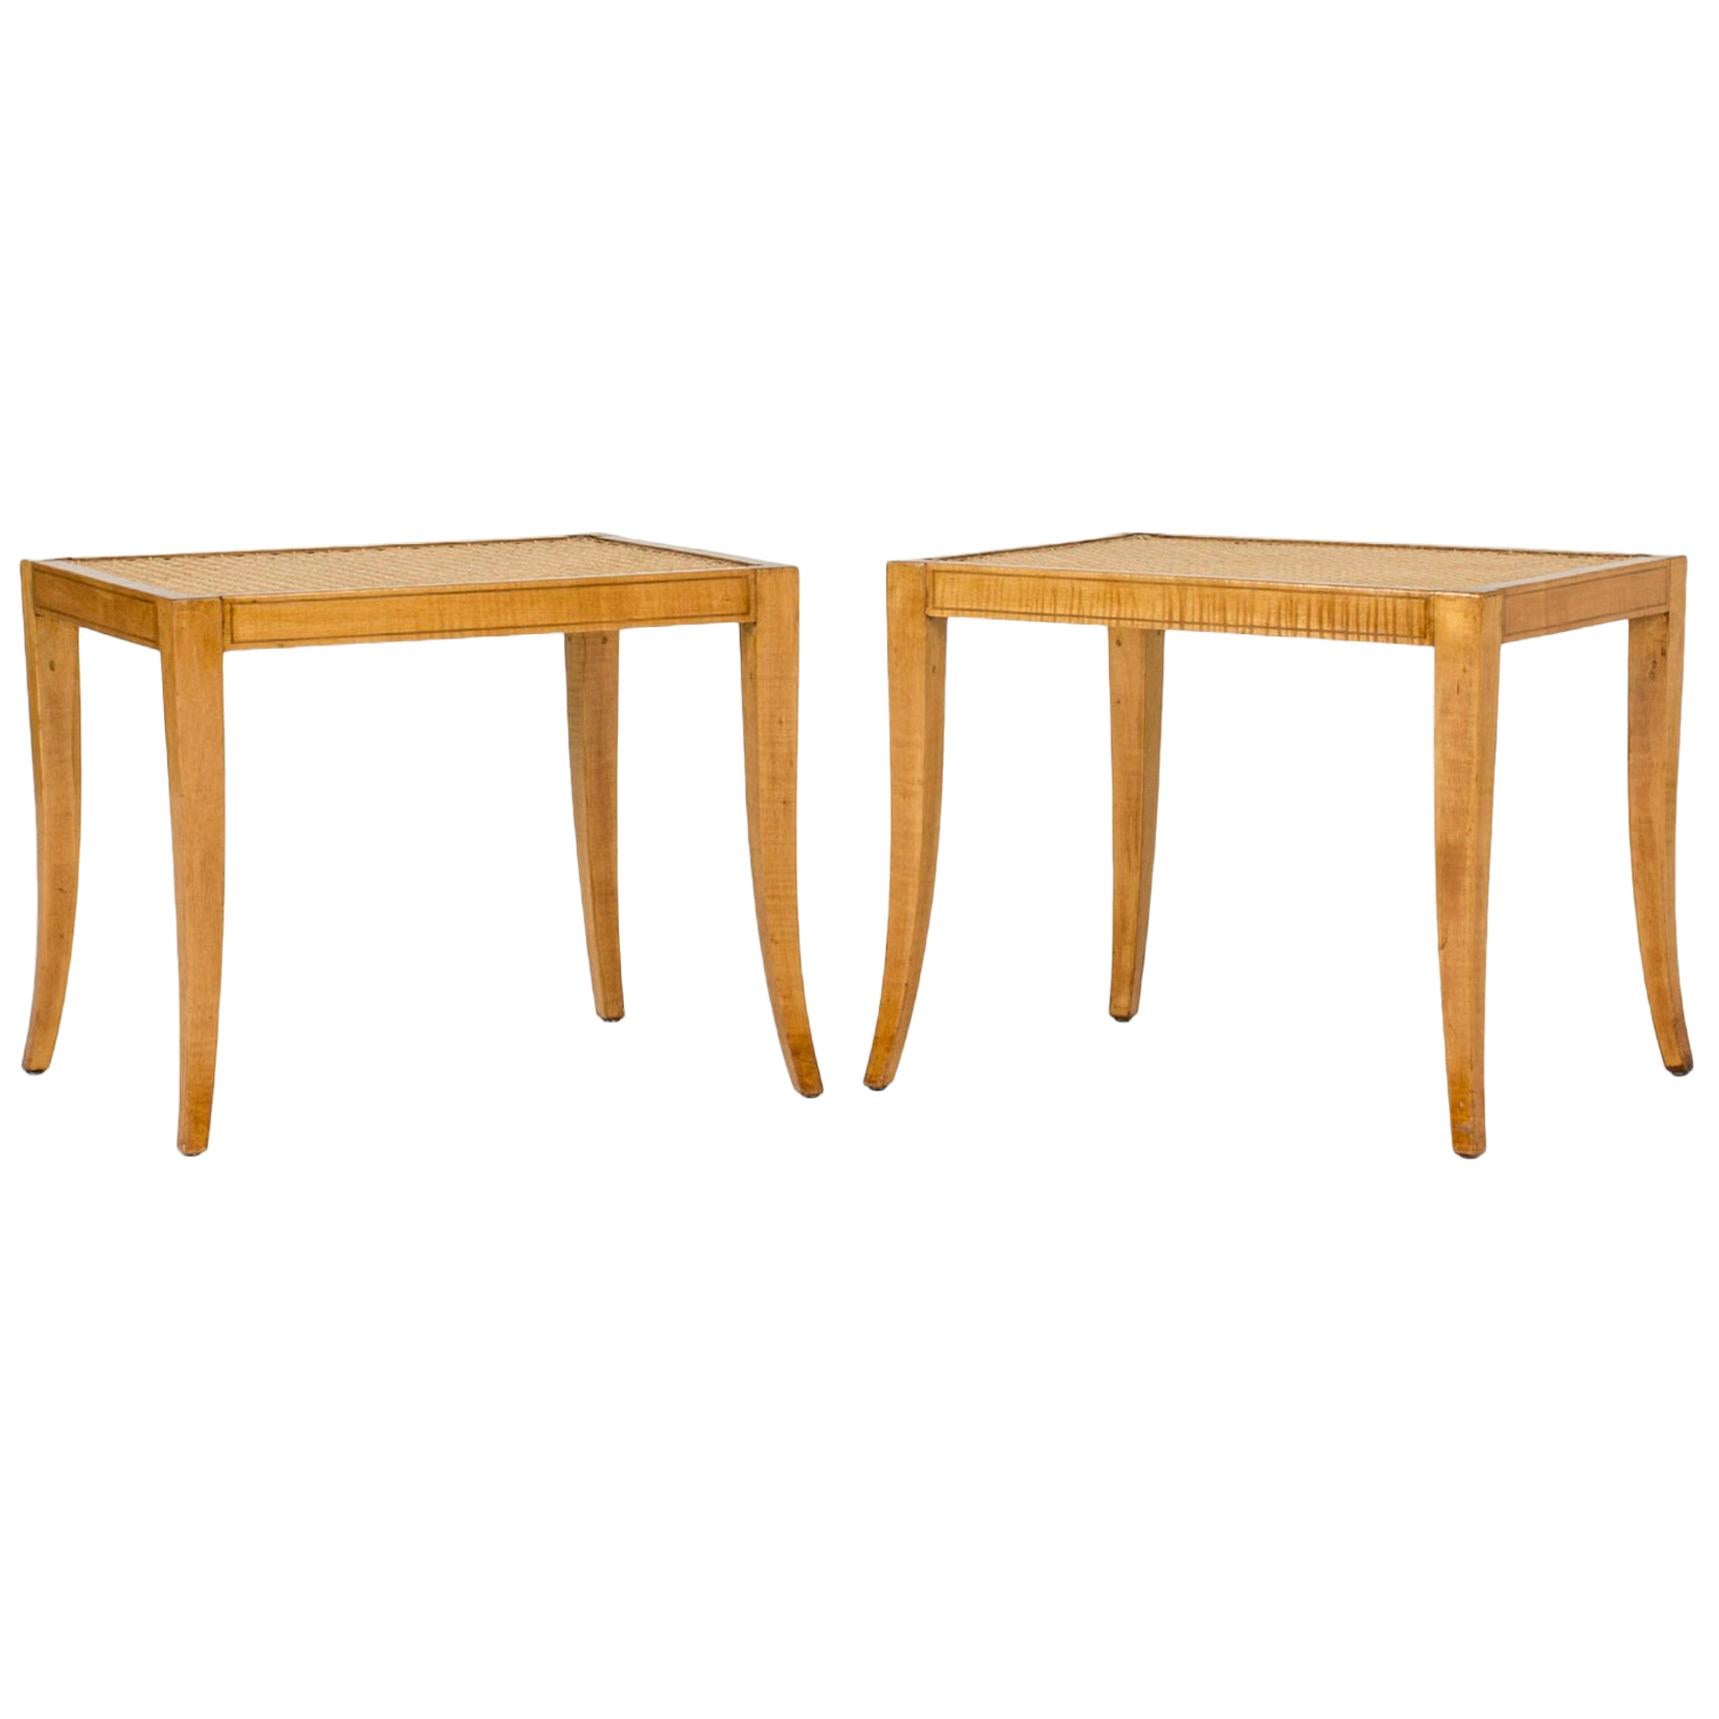 Pair of midcentury stools by Frits Henningsen